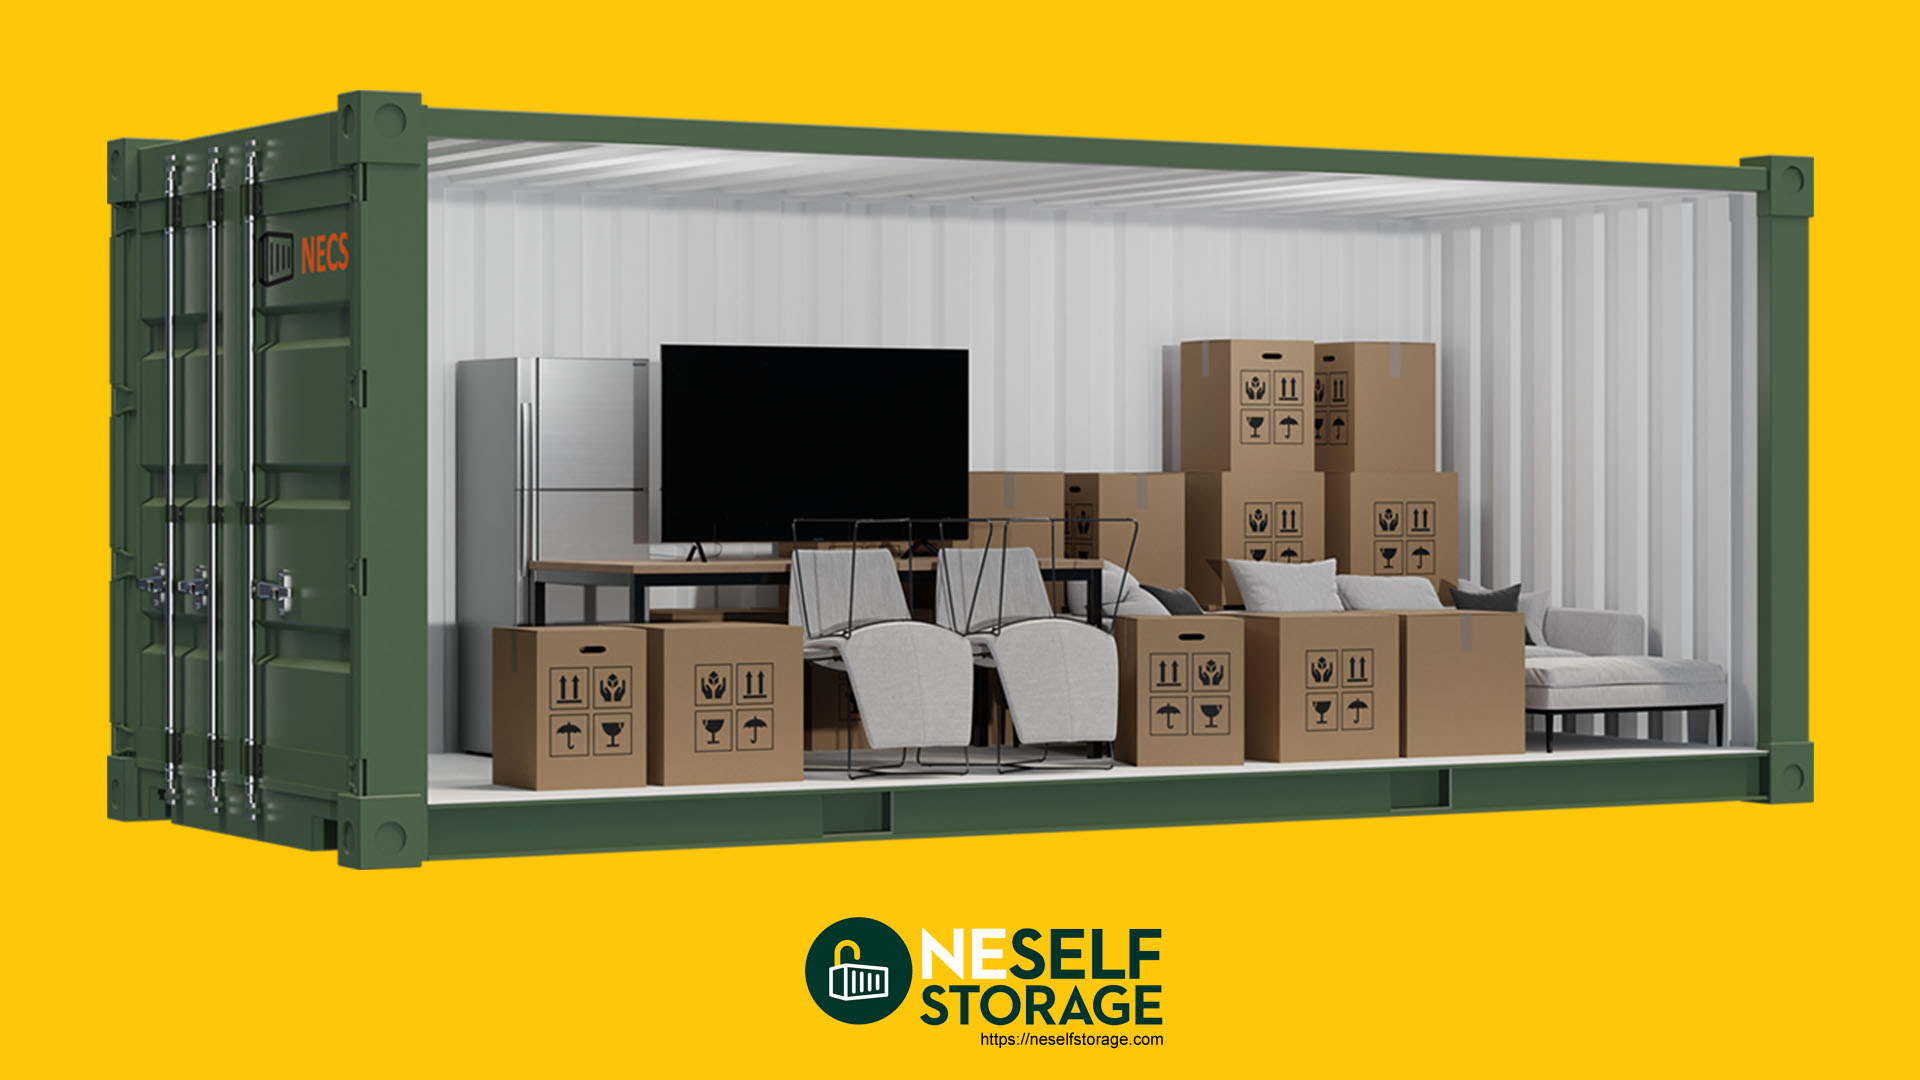 Self Storage Containers - Secure facility in Cramlington with 10ft, 20ft and 40ft containers available for short or long term rental